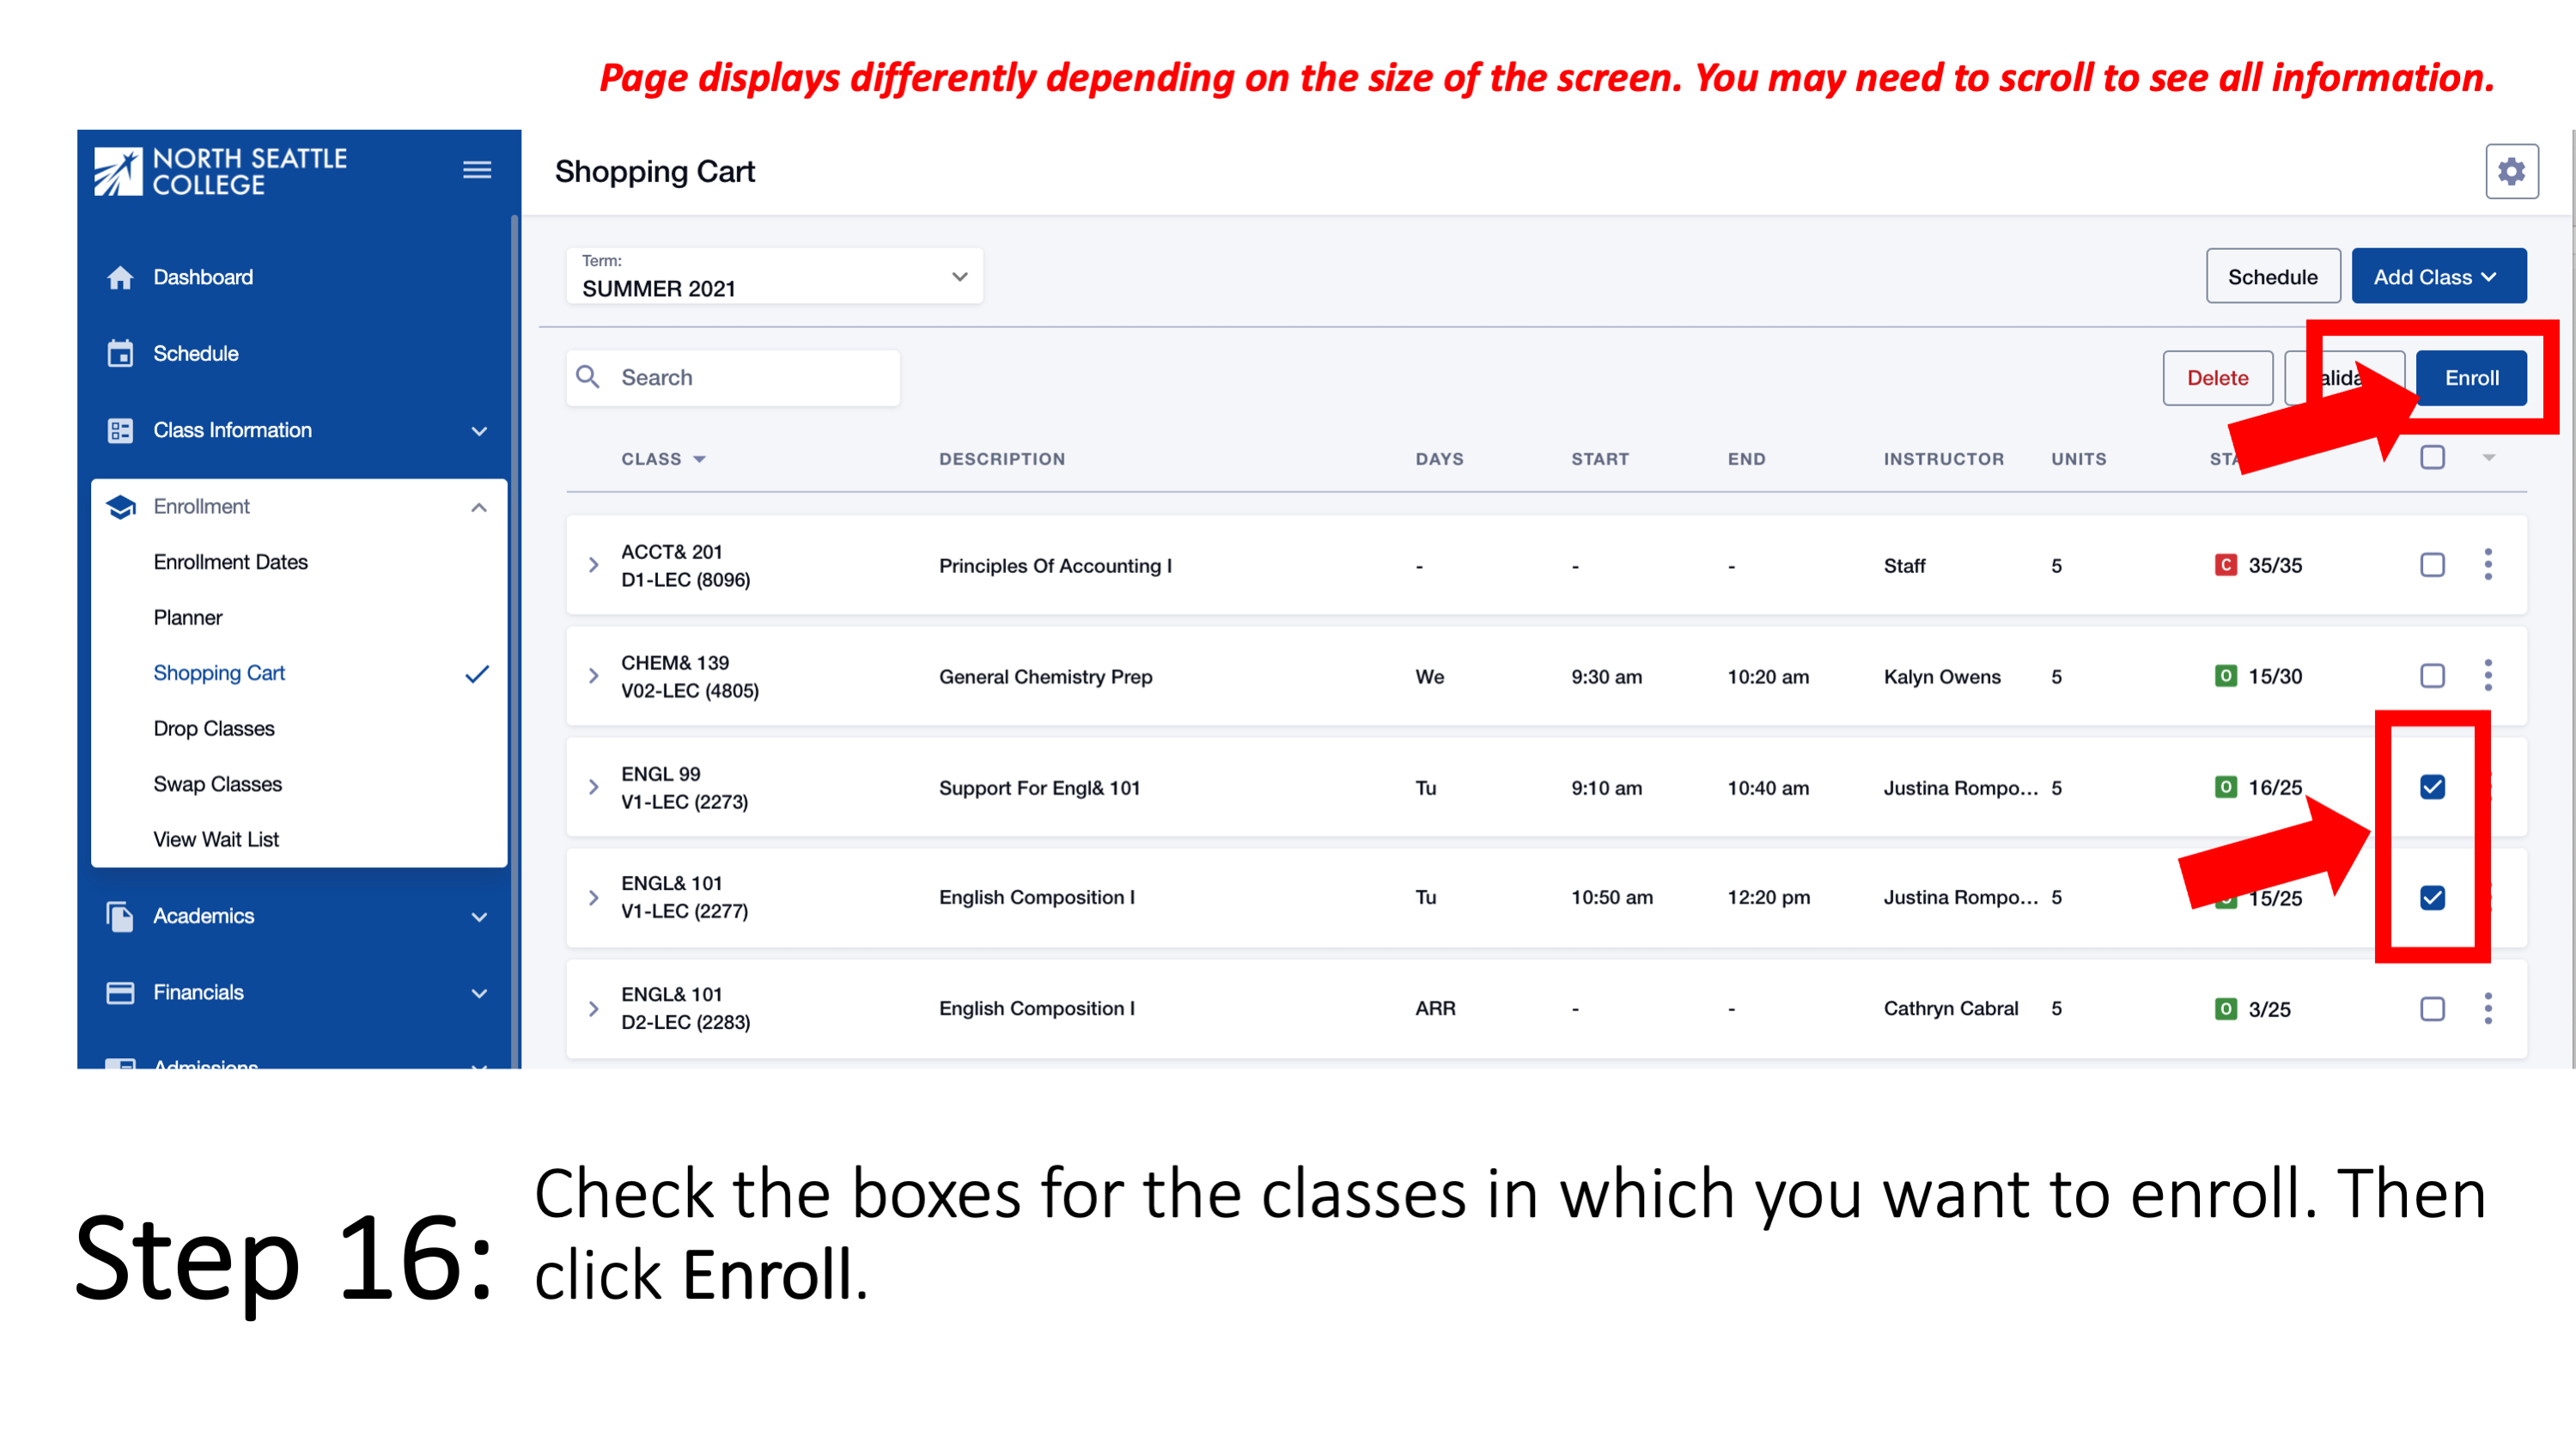 Step 16: Check the boxes for the classes in which you want to enroll. Then click Enroll. Page displays differently depending on the size of the screen. You may need to scroll to see all information.